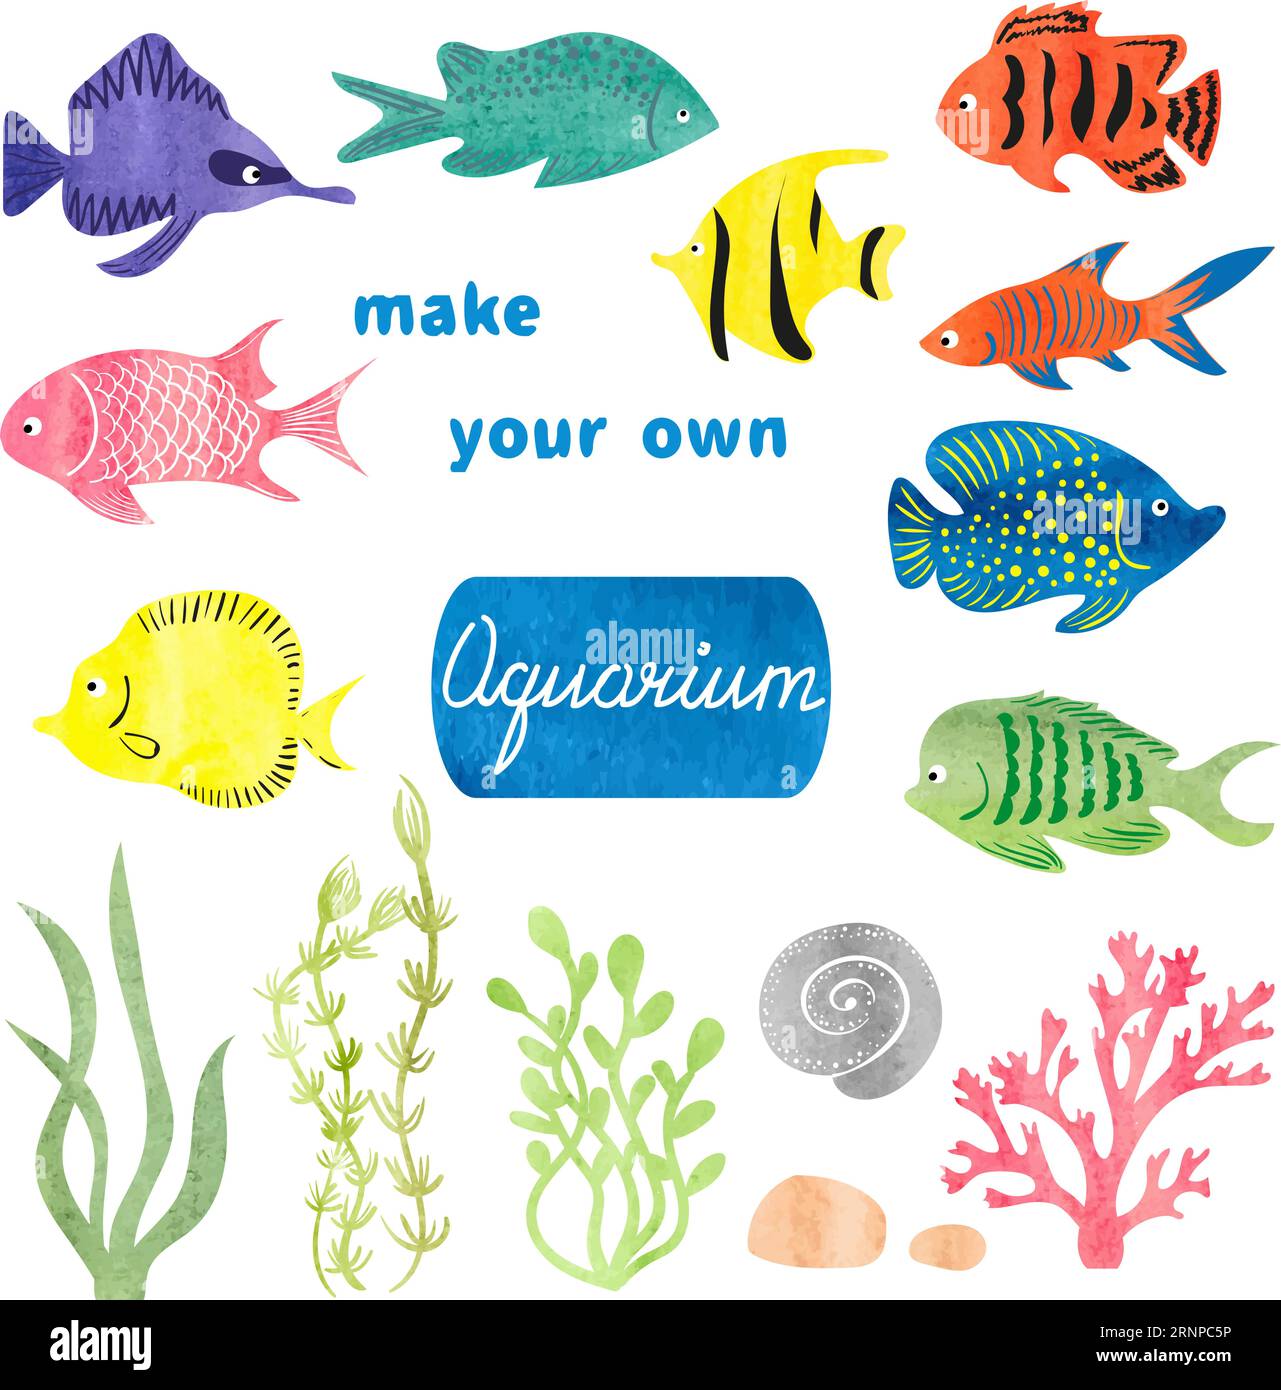 Set of different fishes and decorations for making your own aquarium. Watercolor vector illustration. Tropical fish and seaweeds Stock Vector